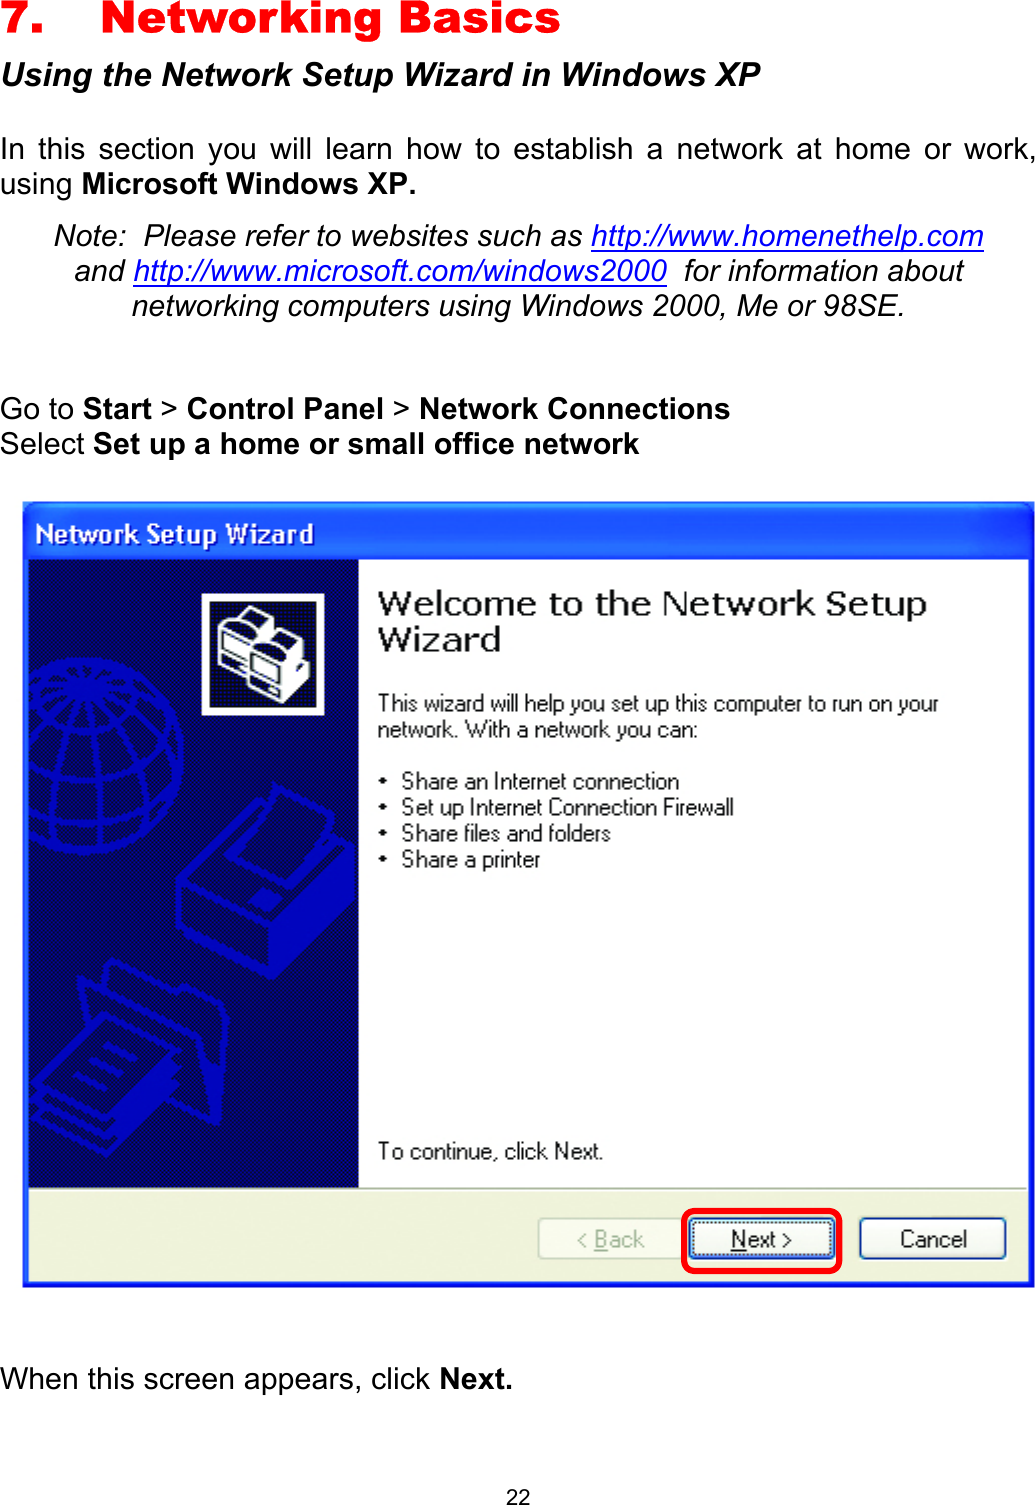  227. Networking Basics Using the Network Setup Wizard in Windows XP  In this section you will learn how to establish a network at home or work, using Microsoft Windows XP.   Note:  Please refer to websites such as http://www.homenethelp.com and http://www.microsoft.com/windows2000  for information about networking computers using Windows 2000, Me or 98SE.  Go to Start &gt; Control Panel &gt; Network Connections Select Set up a home or small office network     When this screen appears, click Next.  